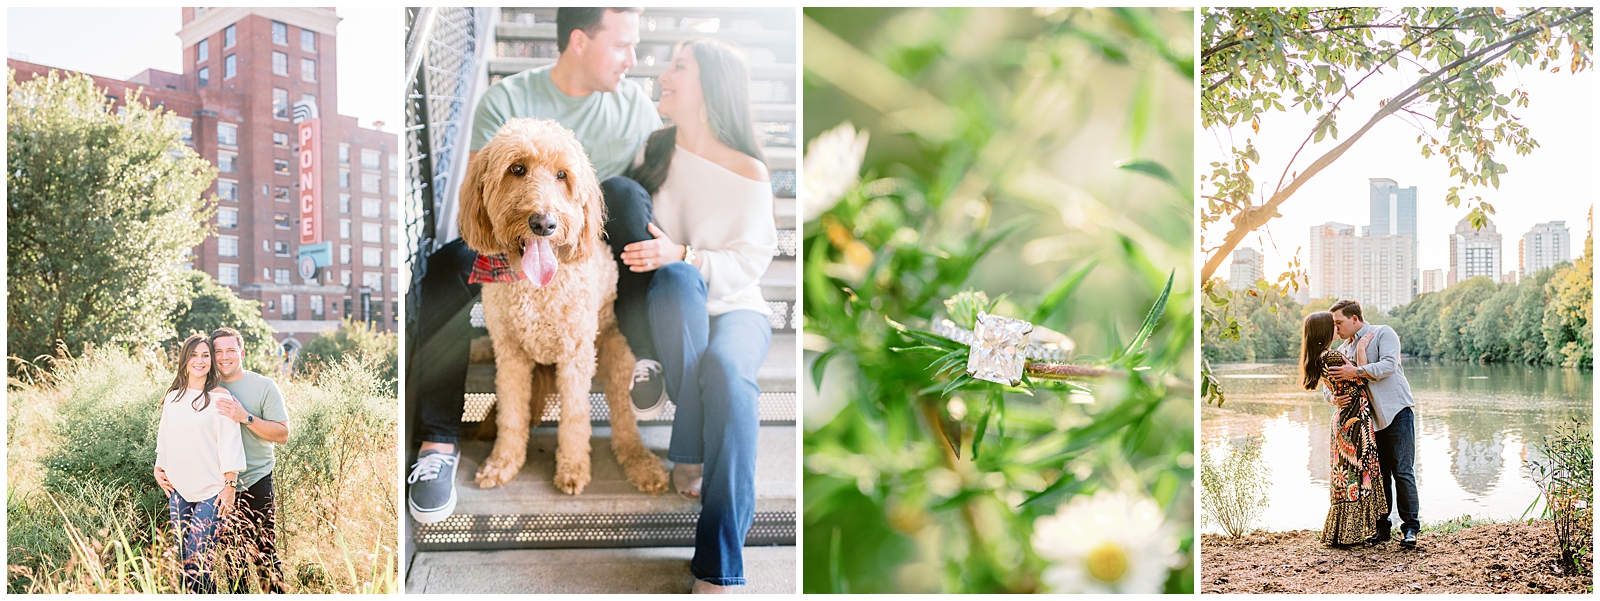 Piedmont Park and Ponce City Market Engagement Session in Atlanta